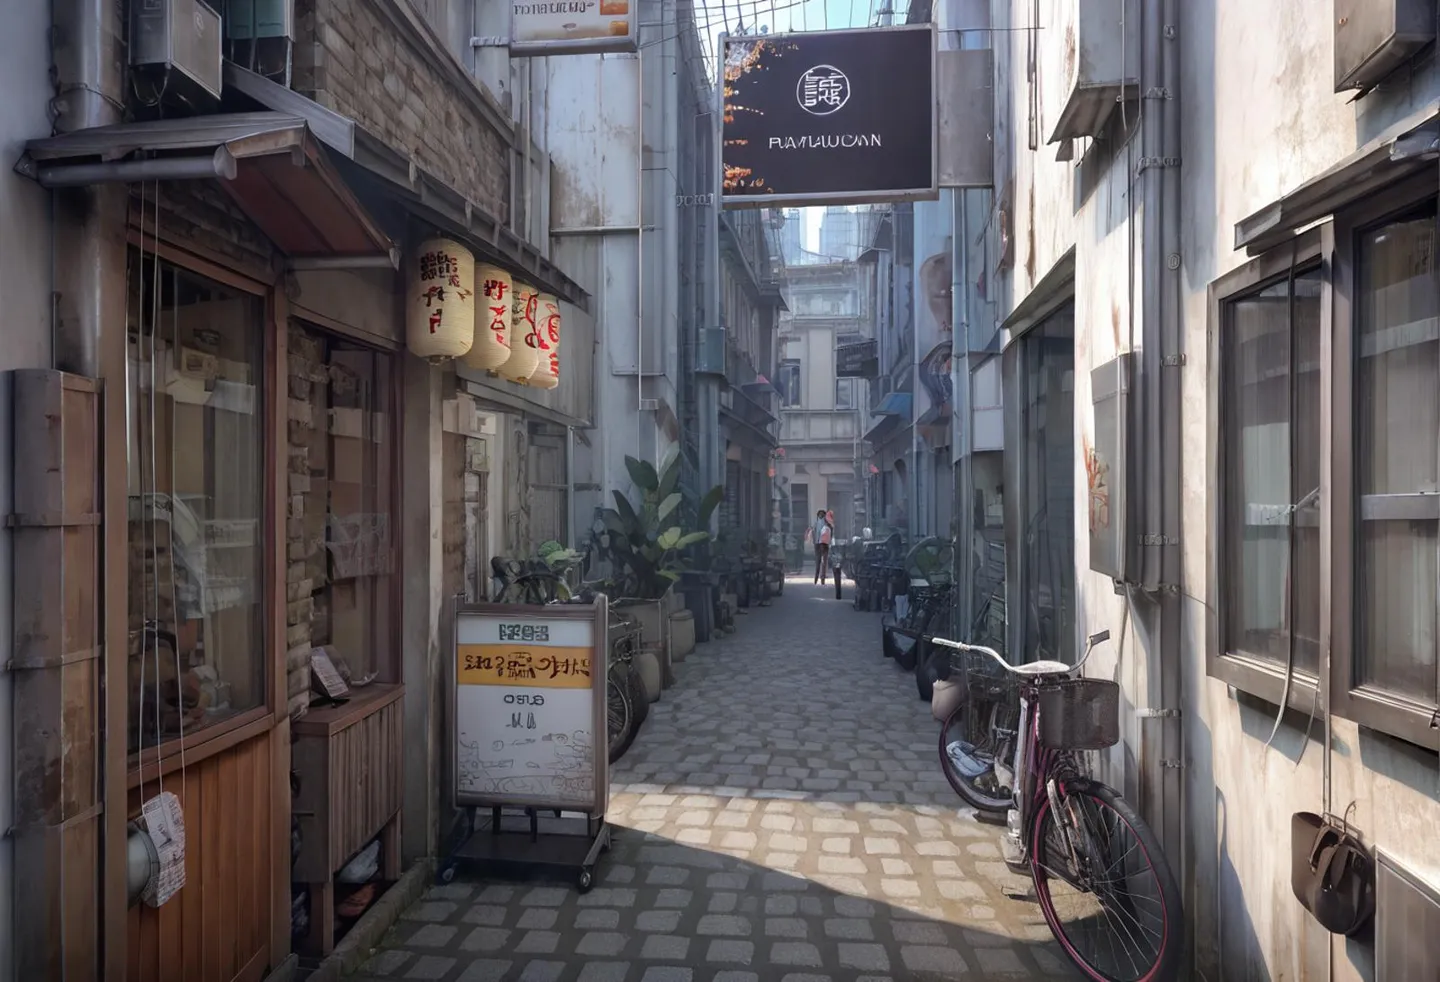 Narrow alley in a traditional Japanese street lined with old buildings, bicycles, and lanterns, AI-generated image using stable diffusion.